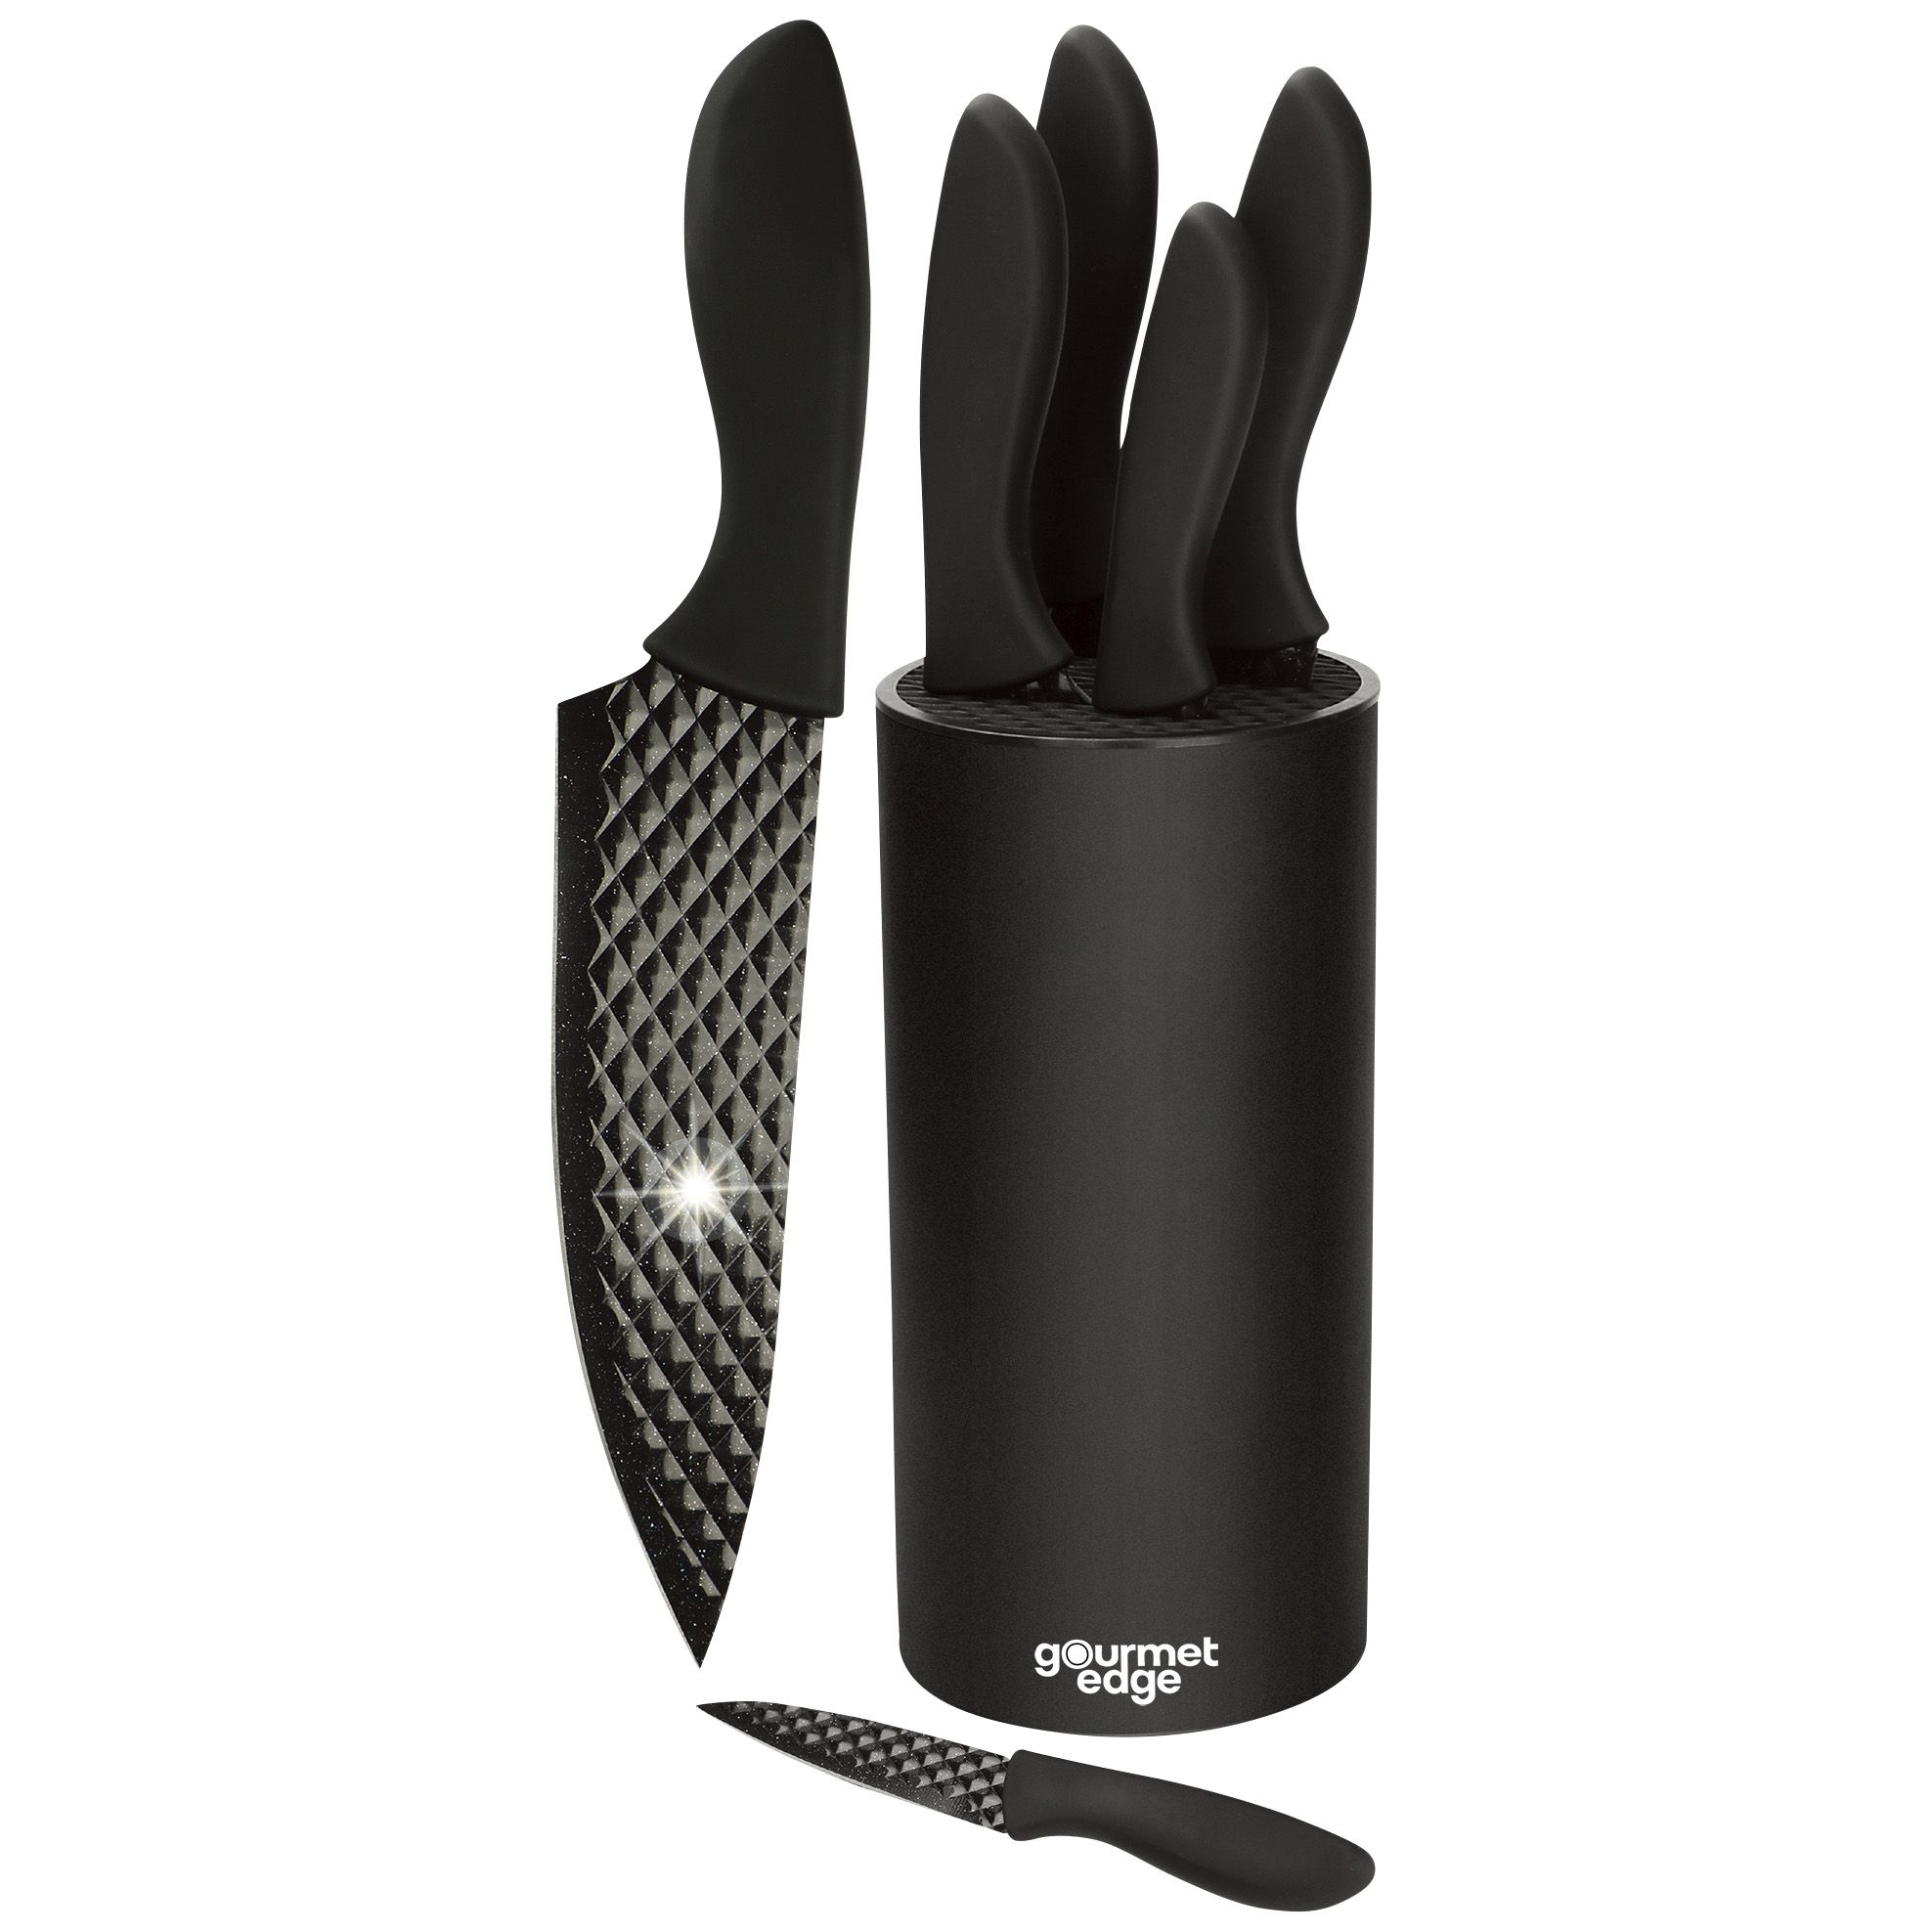 Hastings Home Professional Chef 5 Piece Knife Set - Stainless